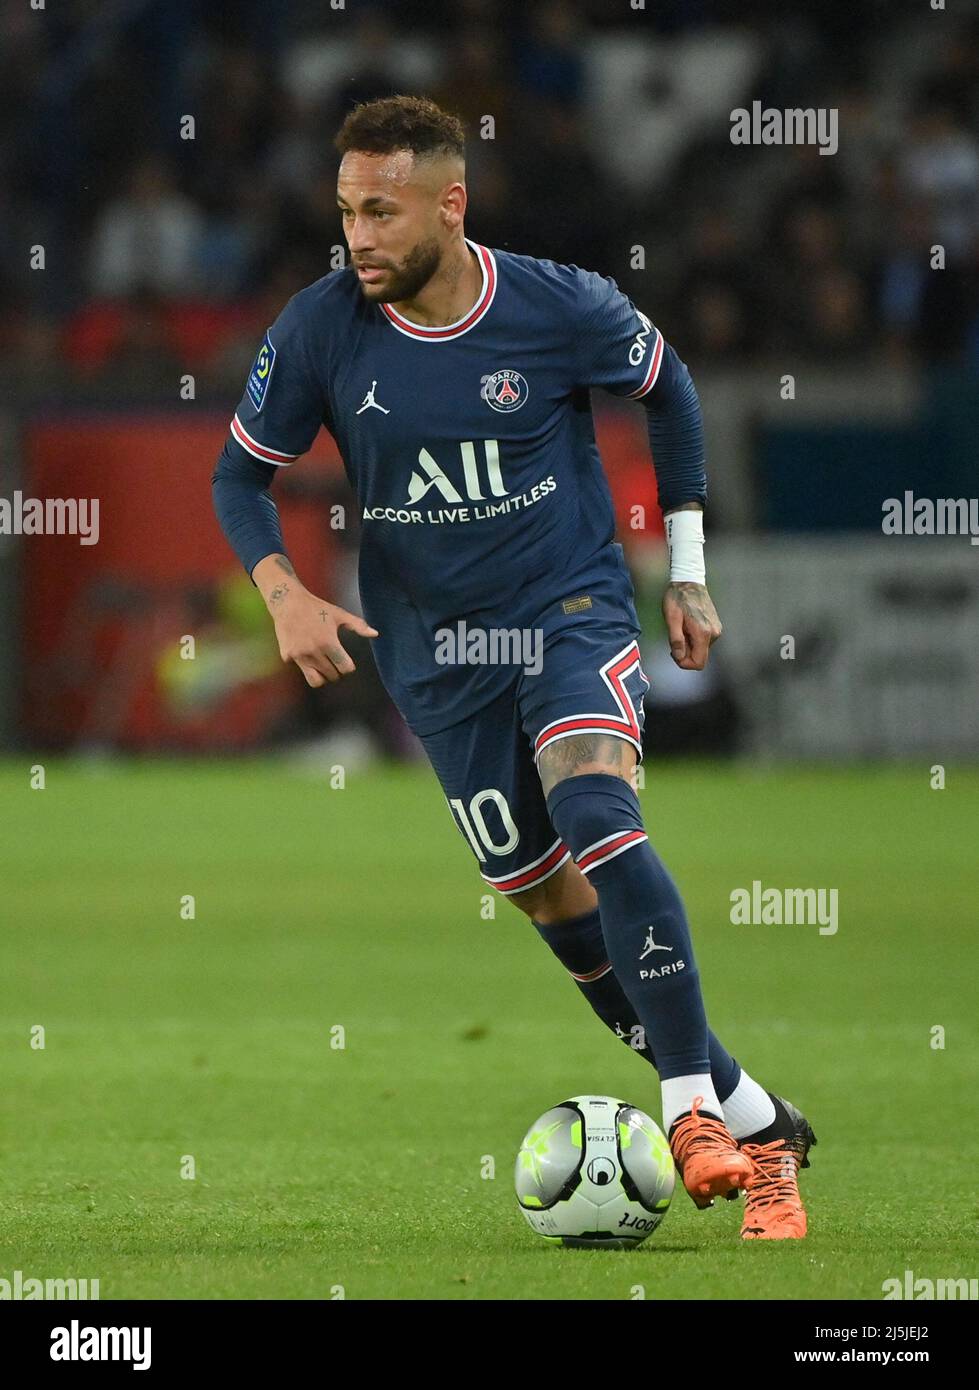 Paris Saint-Germain Neymar during the Ligue 1 Paris Saint-Germain (PSG) v RC Lens football match at Parc des Princes stadium in Paris, France on April 23, 2022. Paris Saint-Germain have won the Ligue 1 title after drawing 1-1 with Lens on Saturday. It looked as if they might have to wait another week to confirm their victory, and were booed off at half-time after a stubborn Lens made life difficult for PSG's star-studded squad. However, the most gilded jewel of all, Lionel Messi, opened the scoring in the 68th minute to secure his first trophy since joining the club from Barcelona last summer. Stock Photo